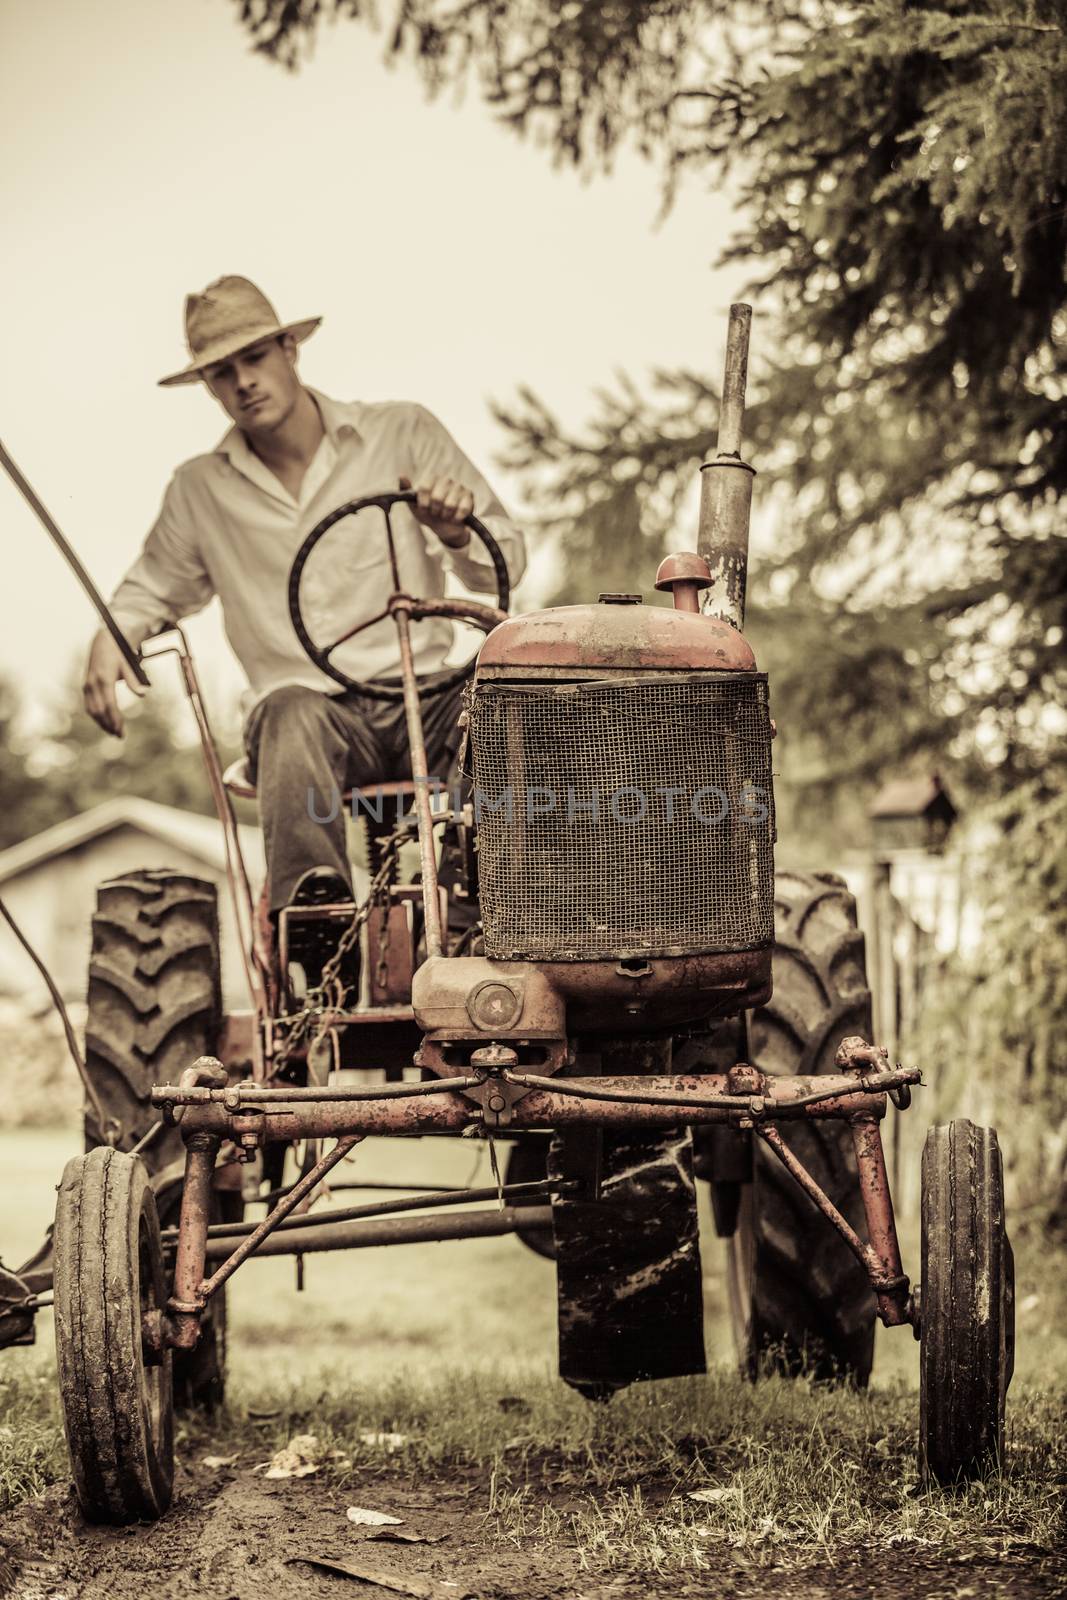 Young Farmer Driving a Red Old Vintage Tractor